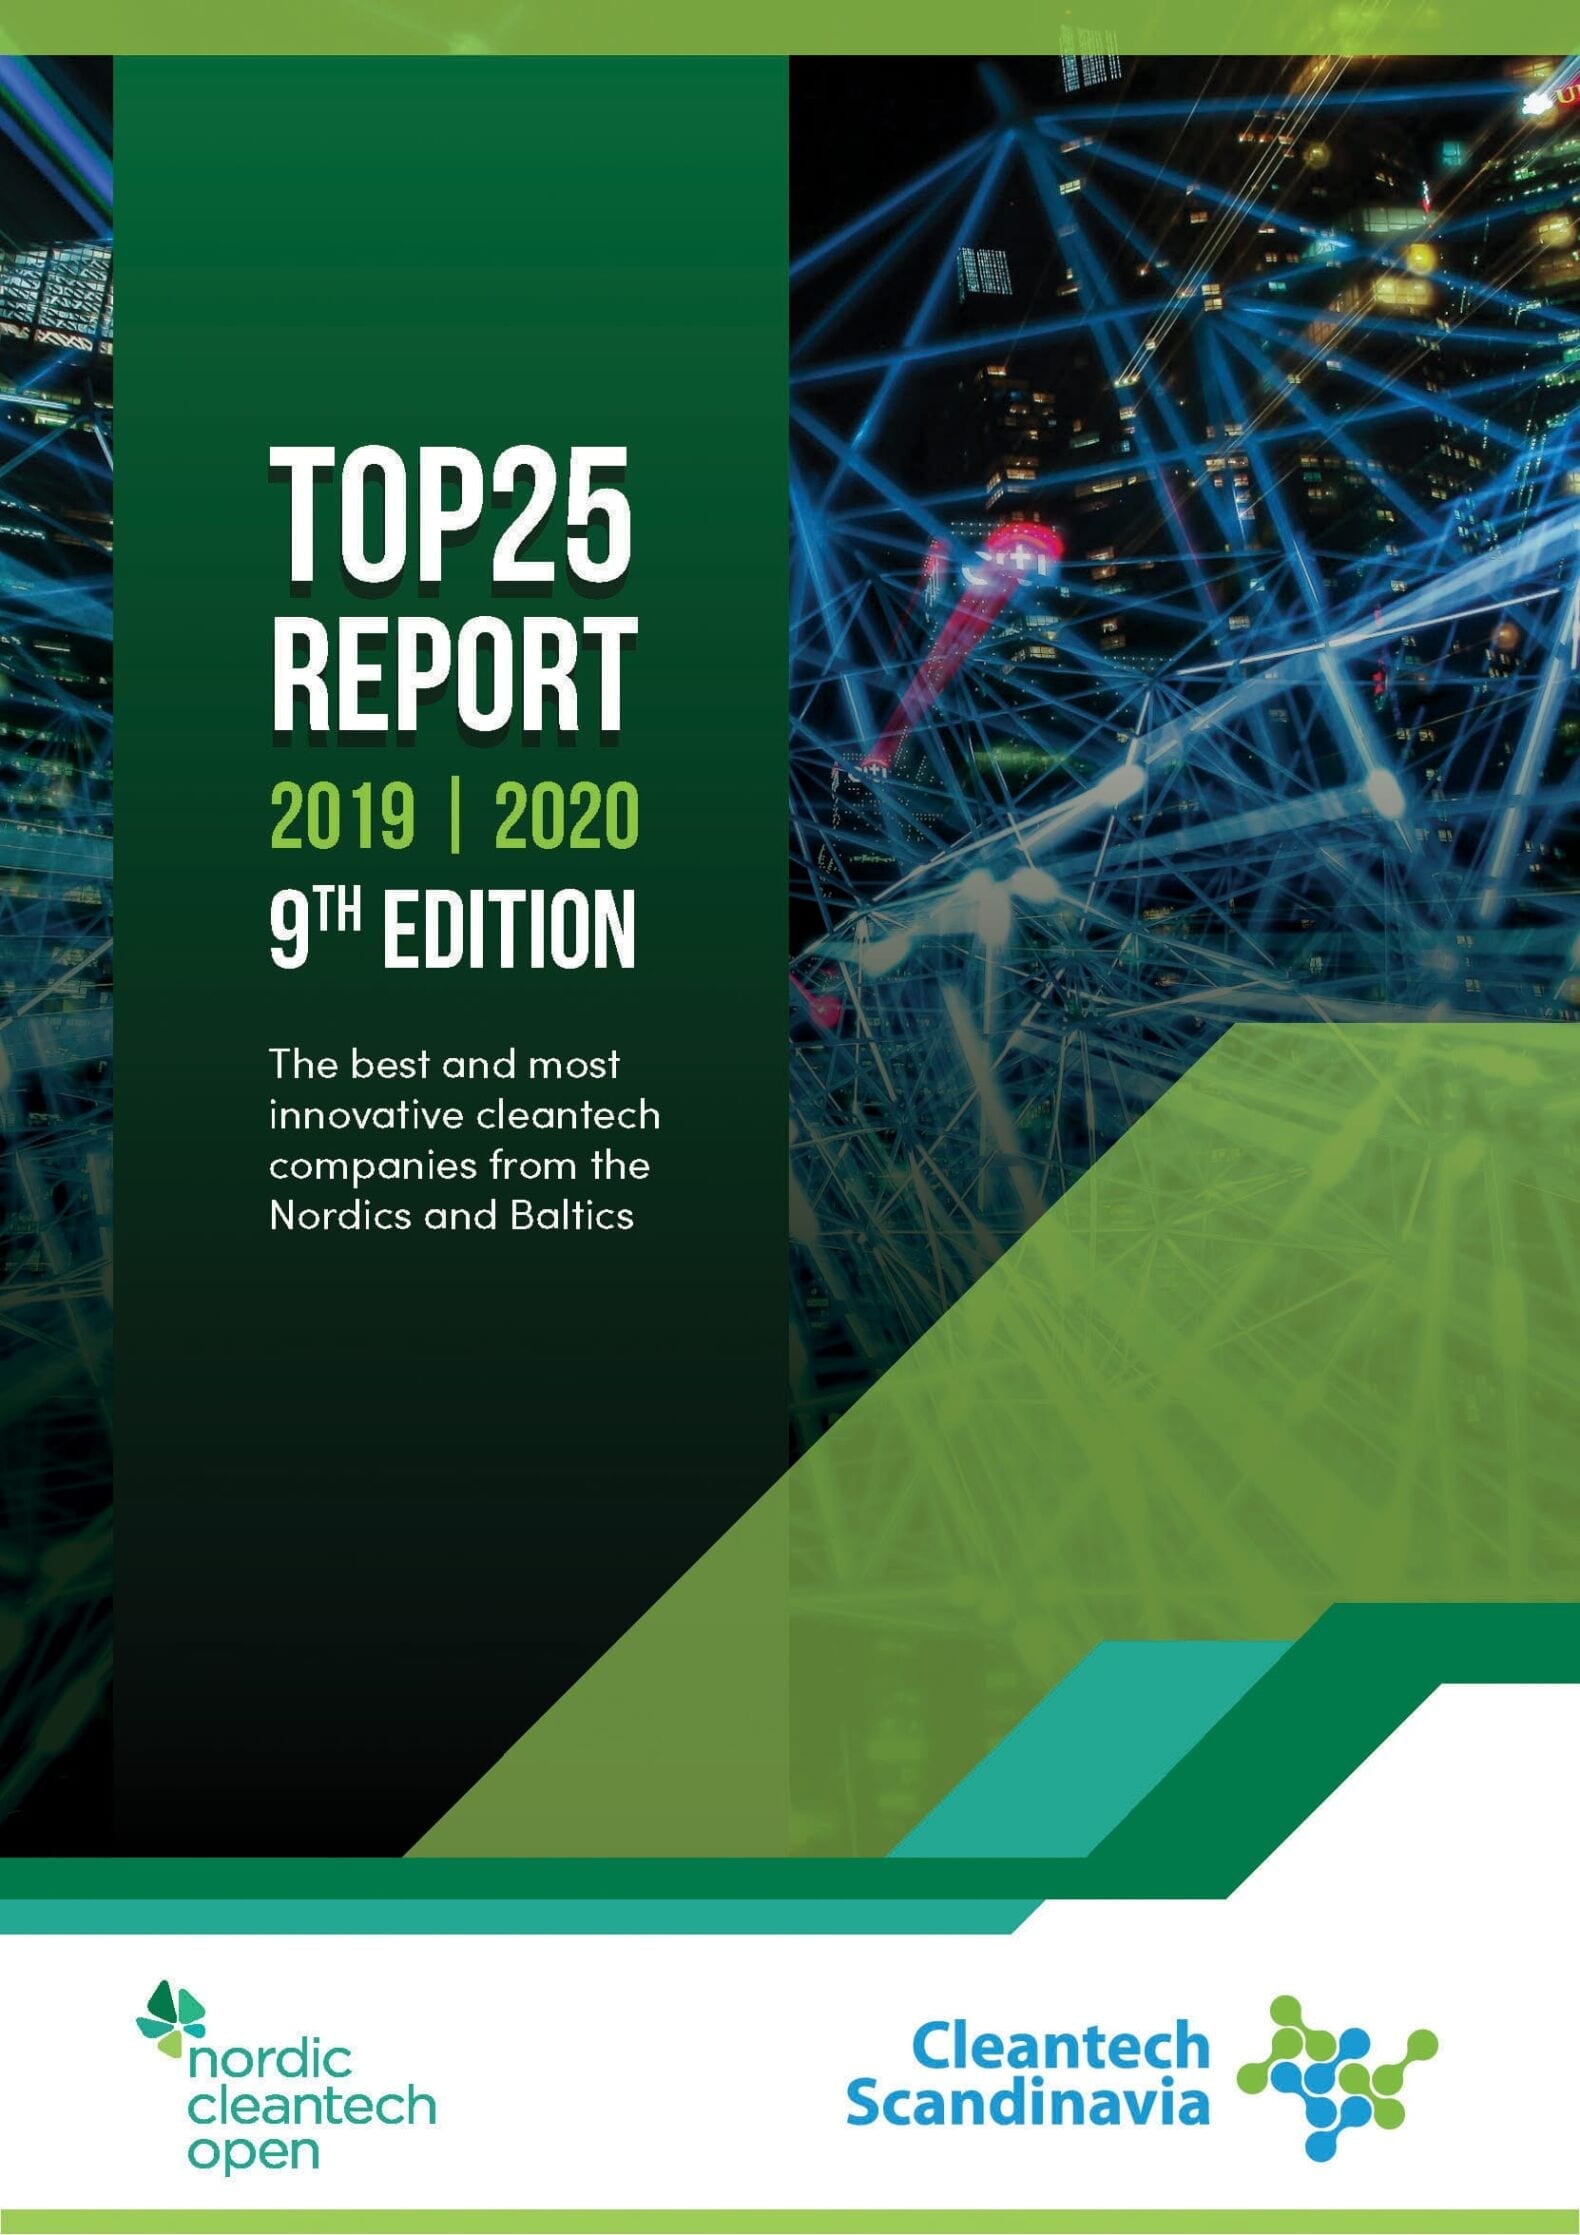 Top 25 Report - Cycle 2019/20